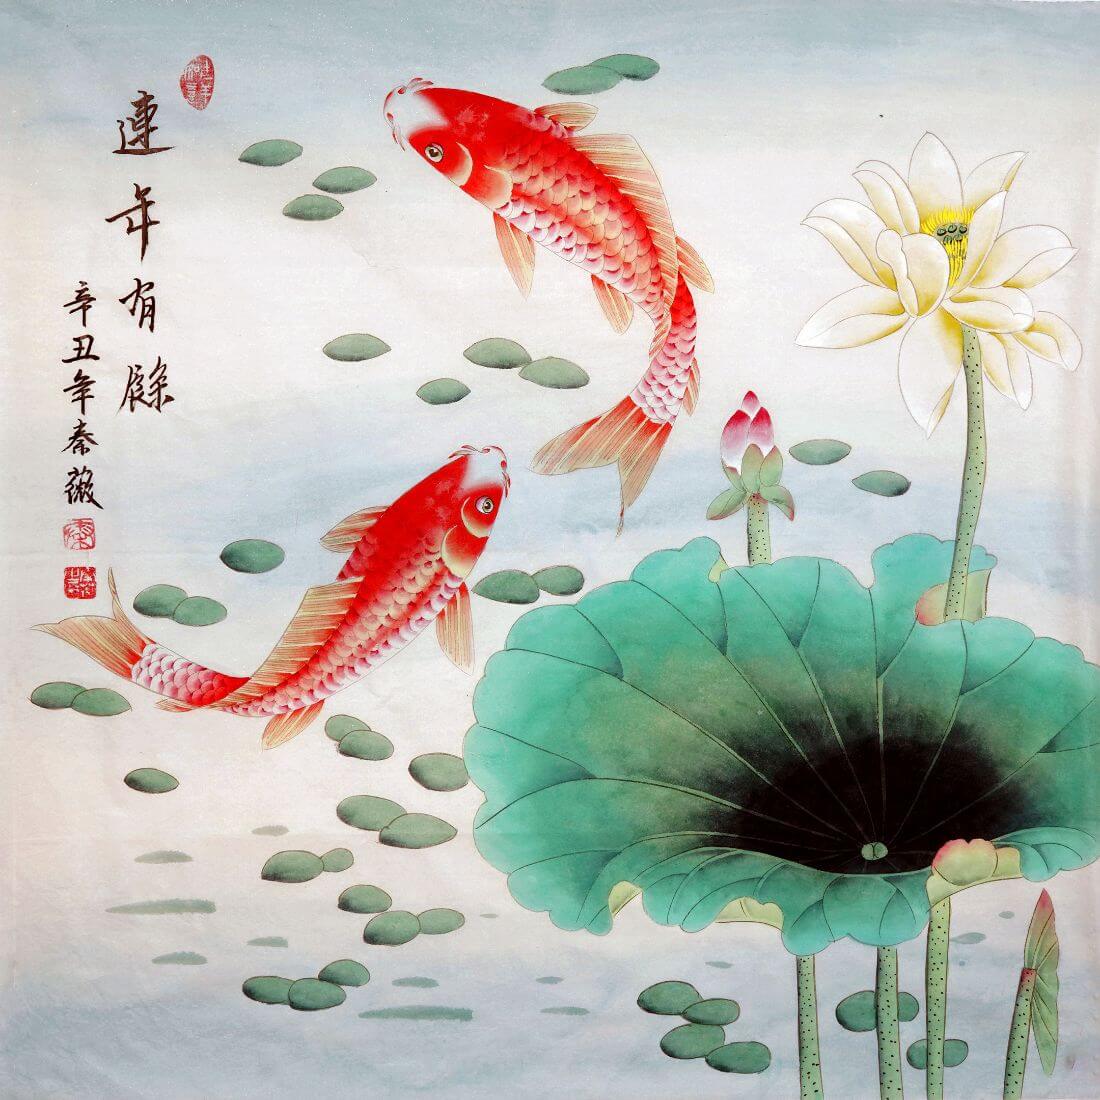 Koi Fish With Lotus - Feng Shui Gongbi Painting - Framed Prints By Roselyn  Imani | Buy Posters, Frames, Canvas & Digital Art Prints | Small, Compact,  Medium And Large Variants